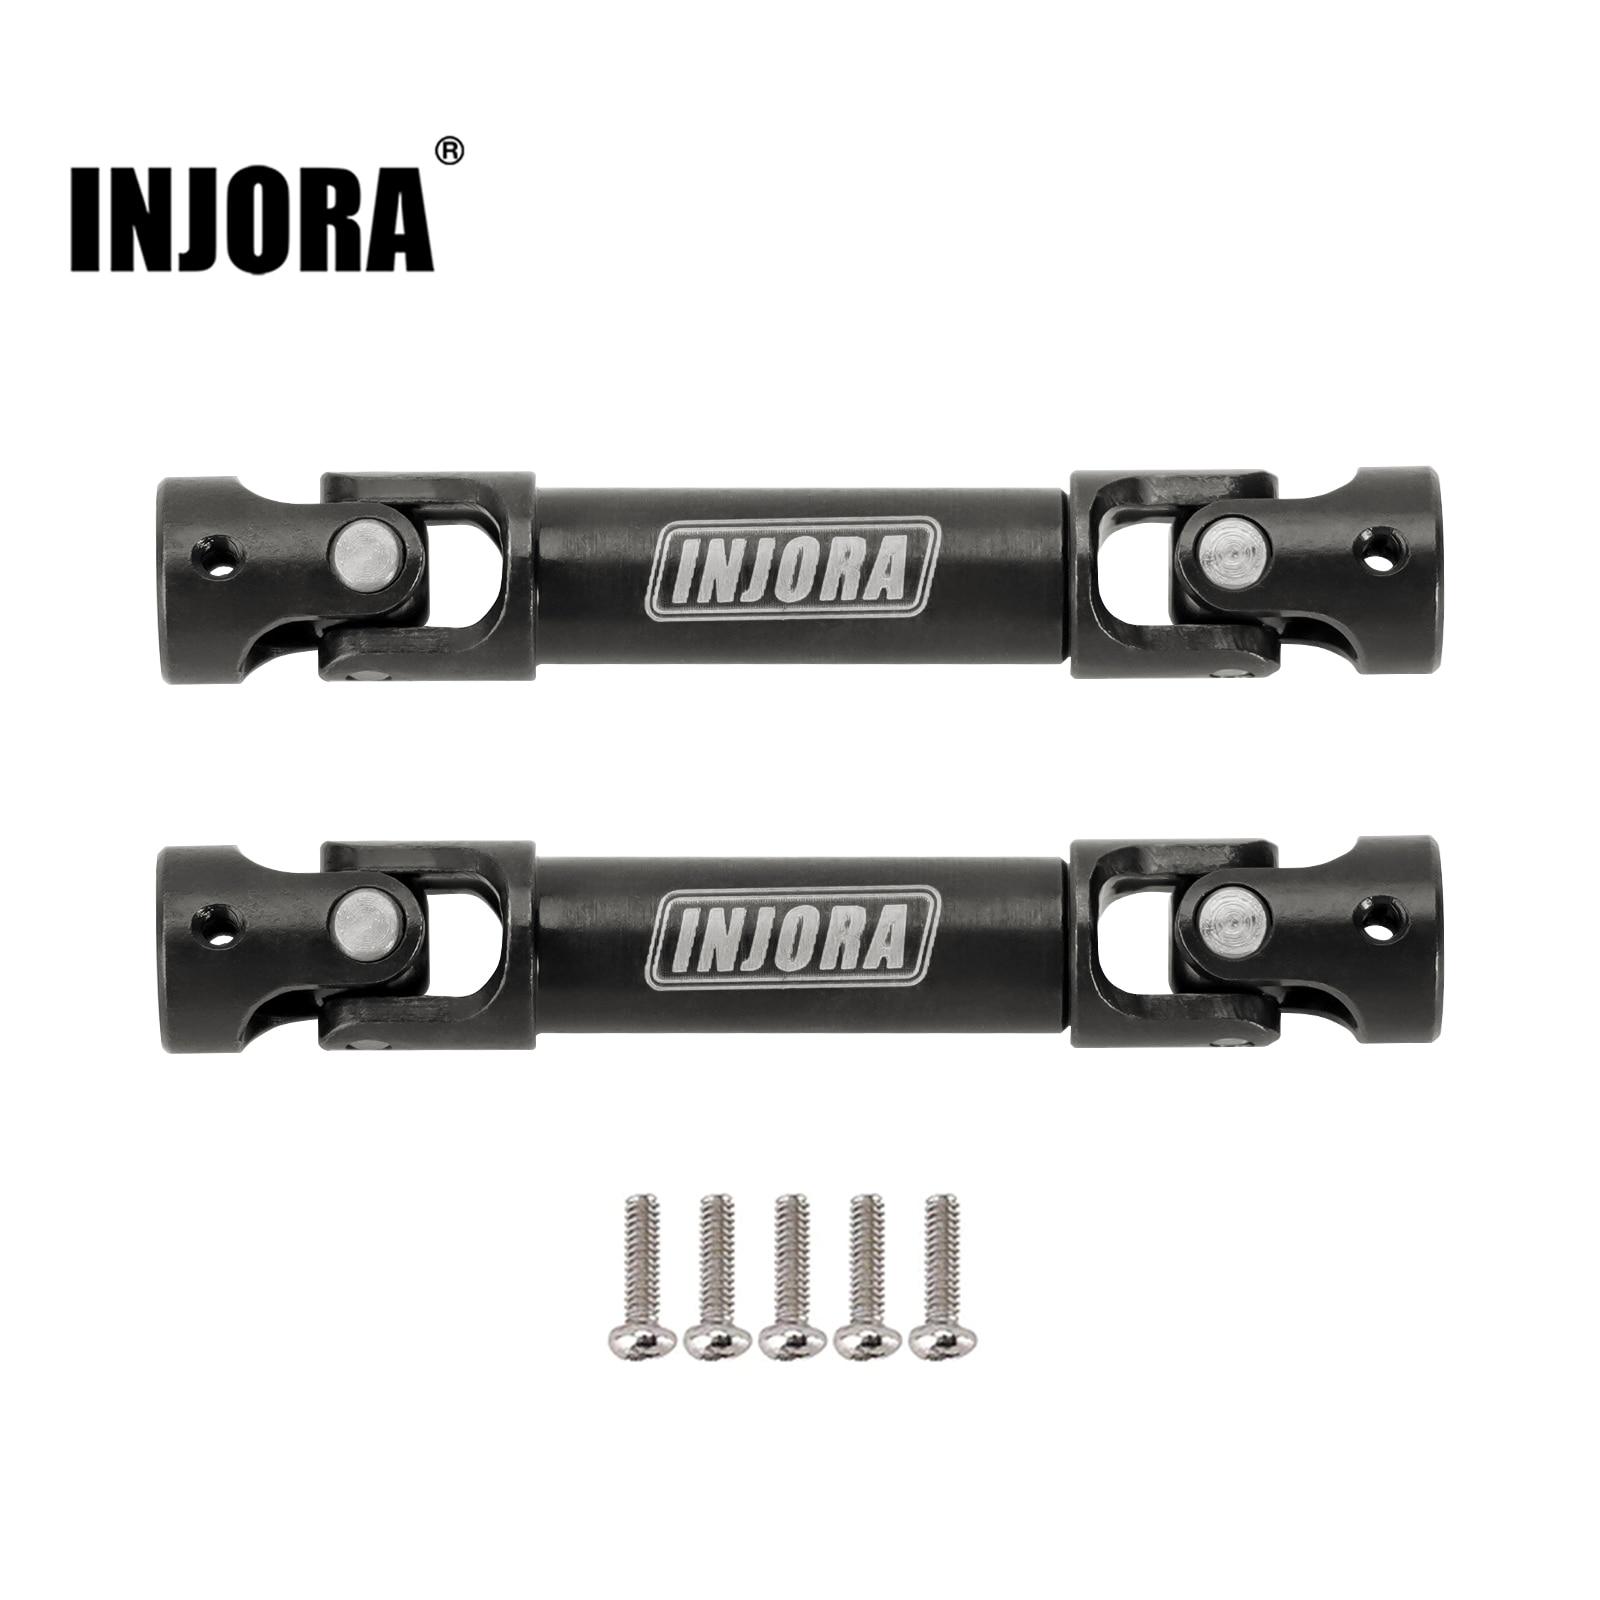 INJORA-Hardened-Steel-Drive-Shafts-with-D-shaped-Holes-for-1-24-RC-Crawler-FMS-FCX24.jpg